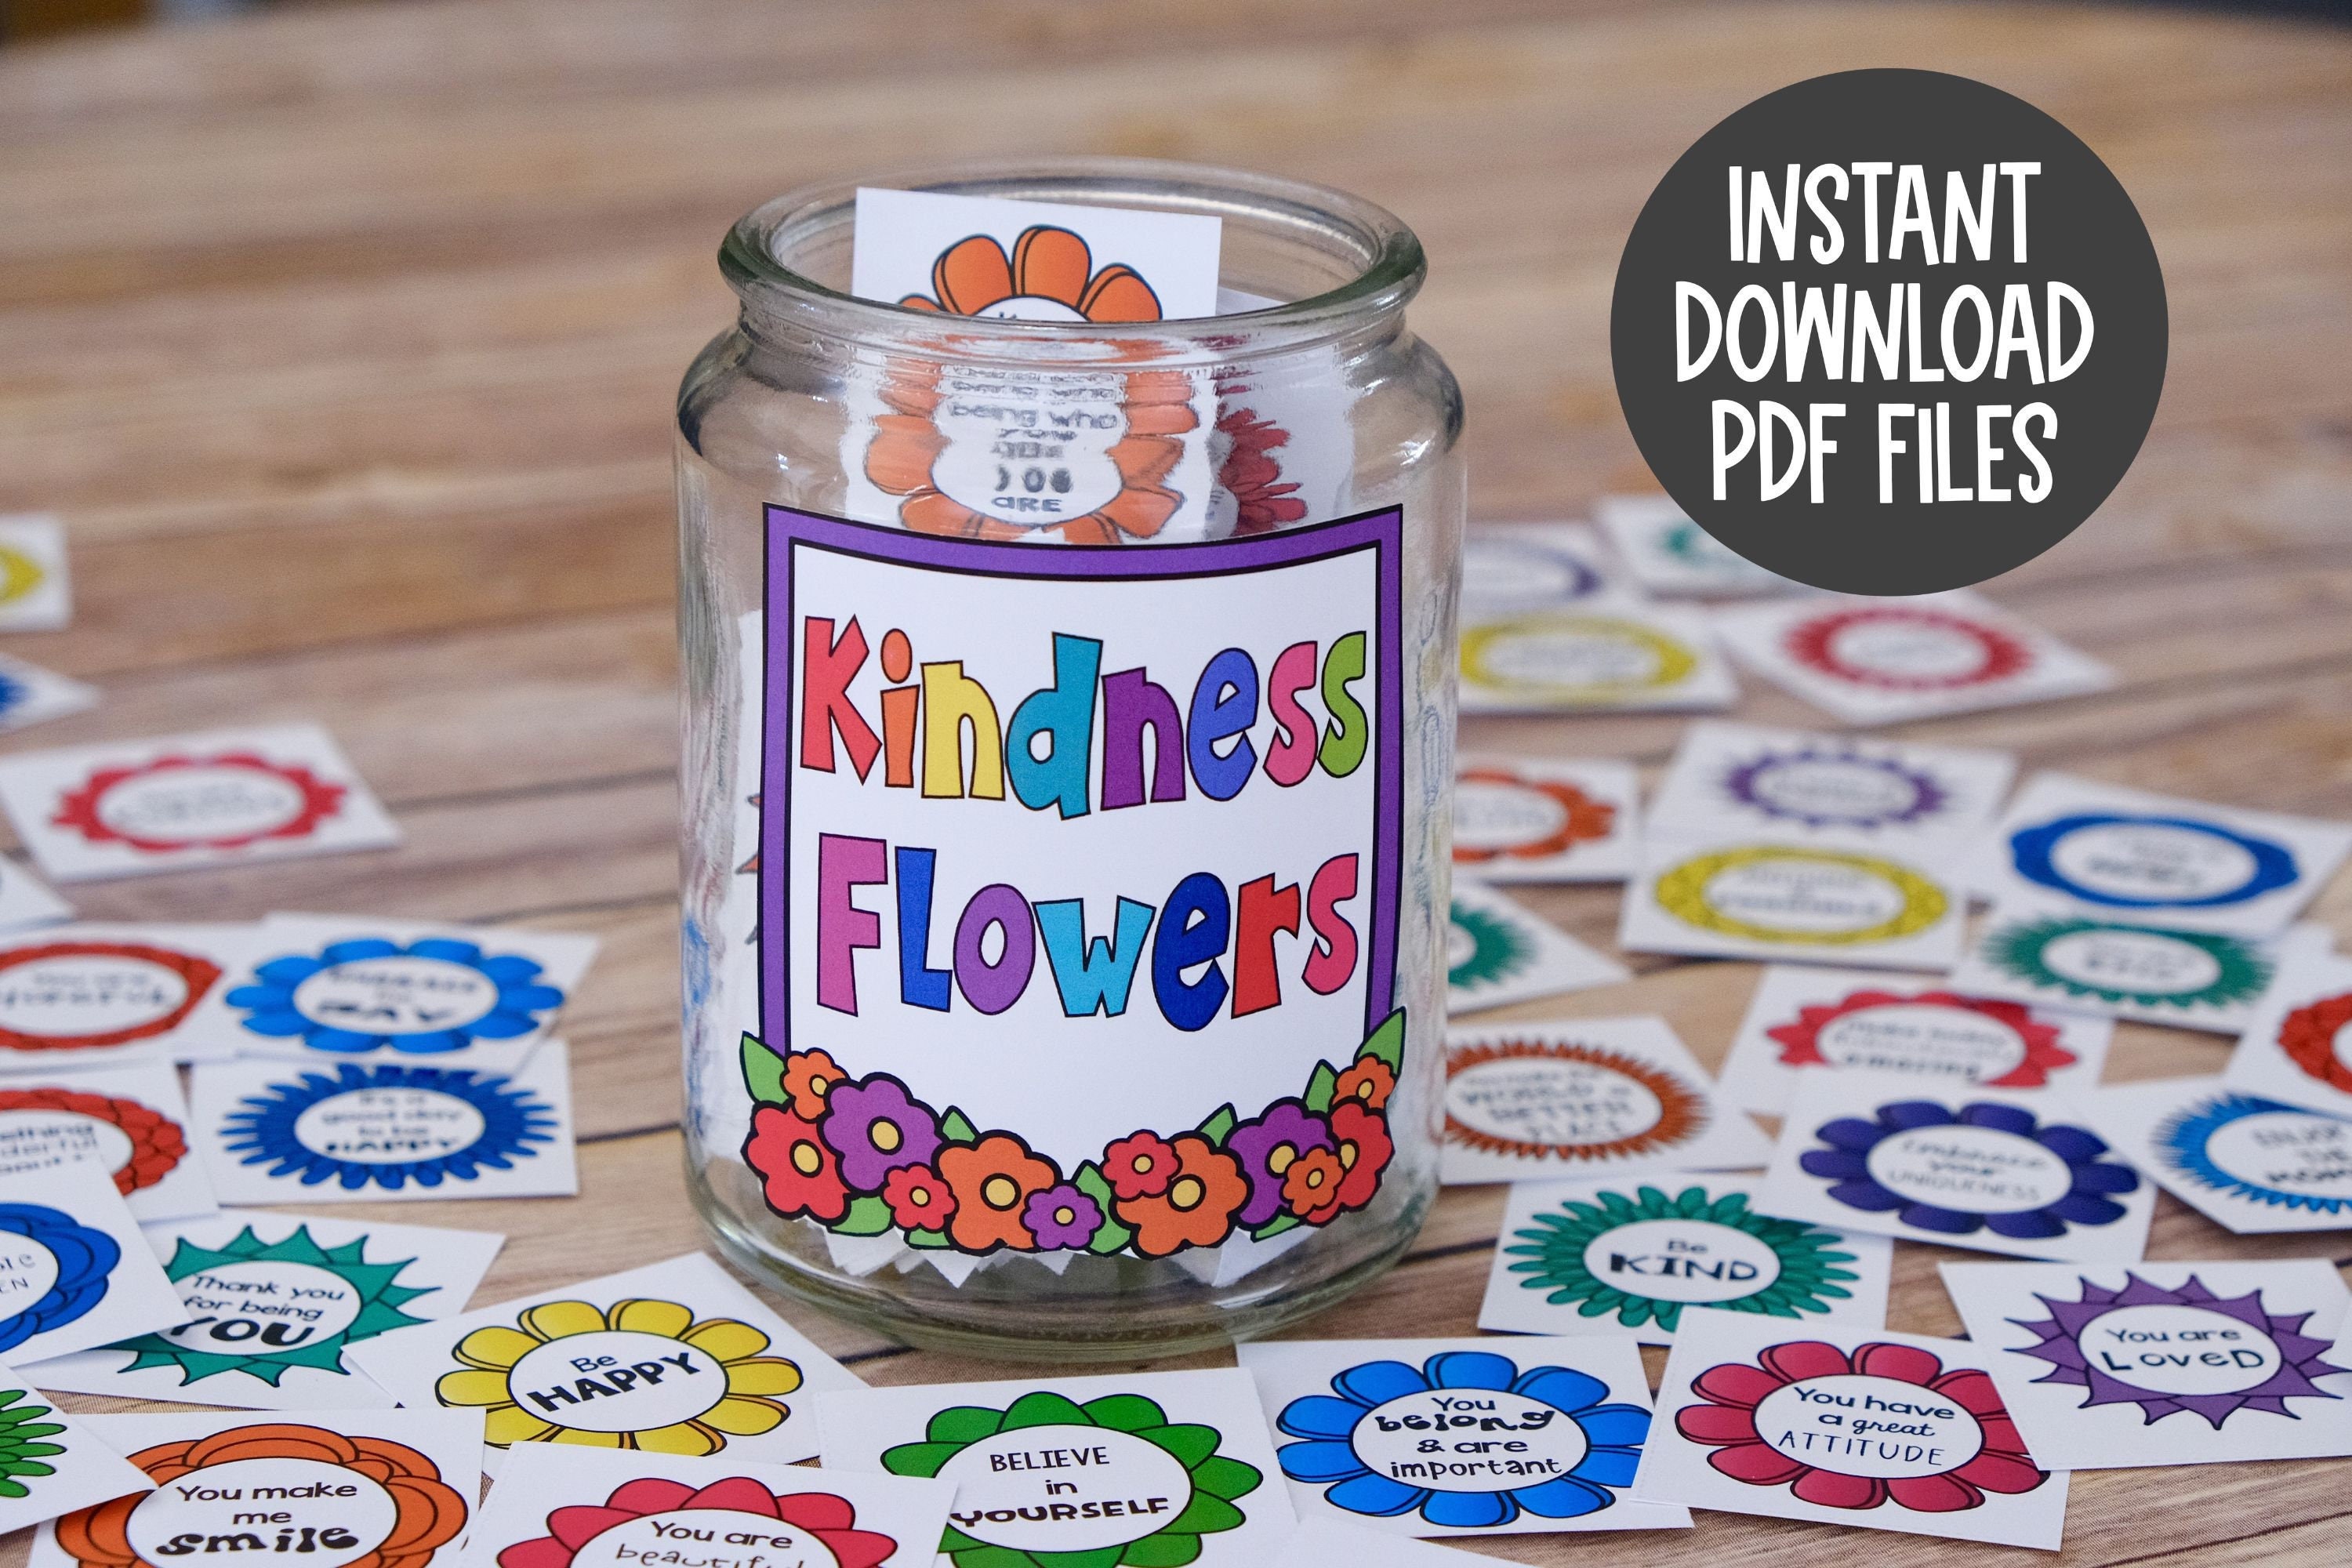 Kindness Card Making Online Lesson – Craft Fun